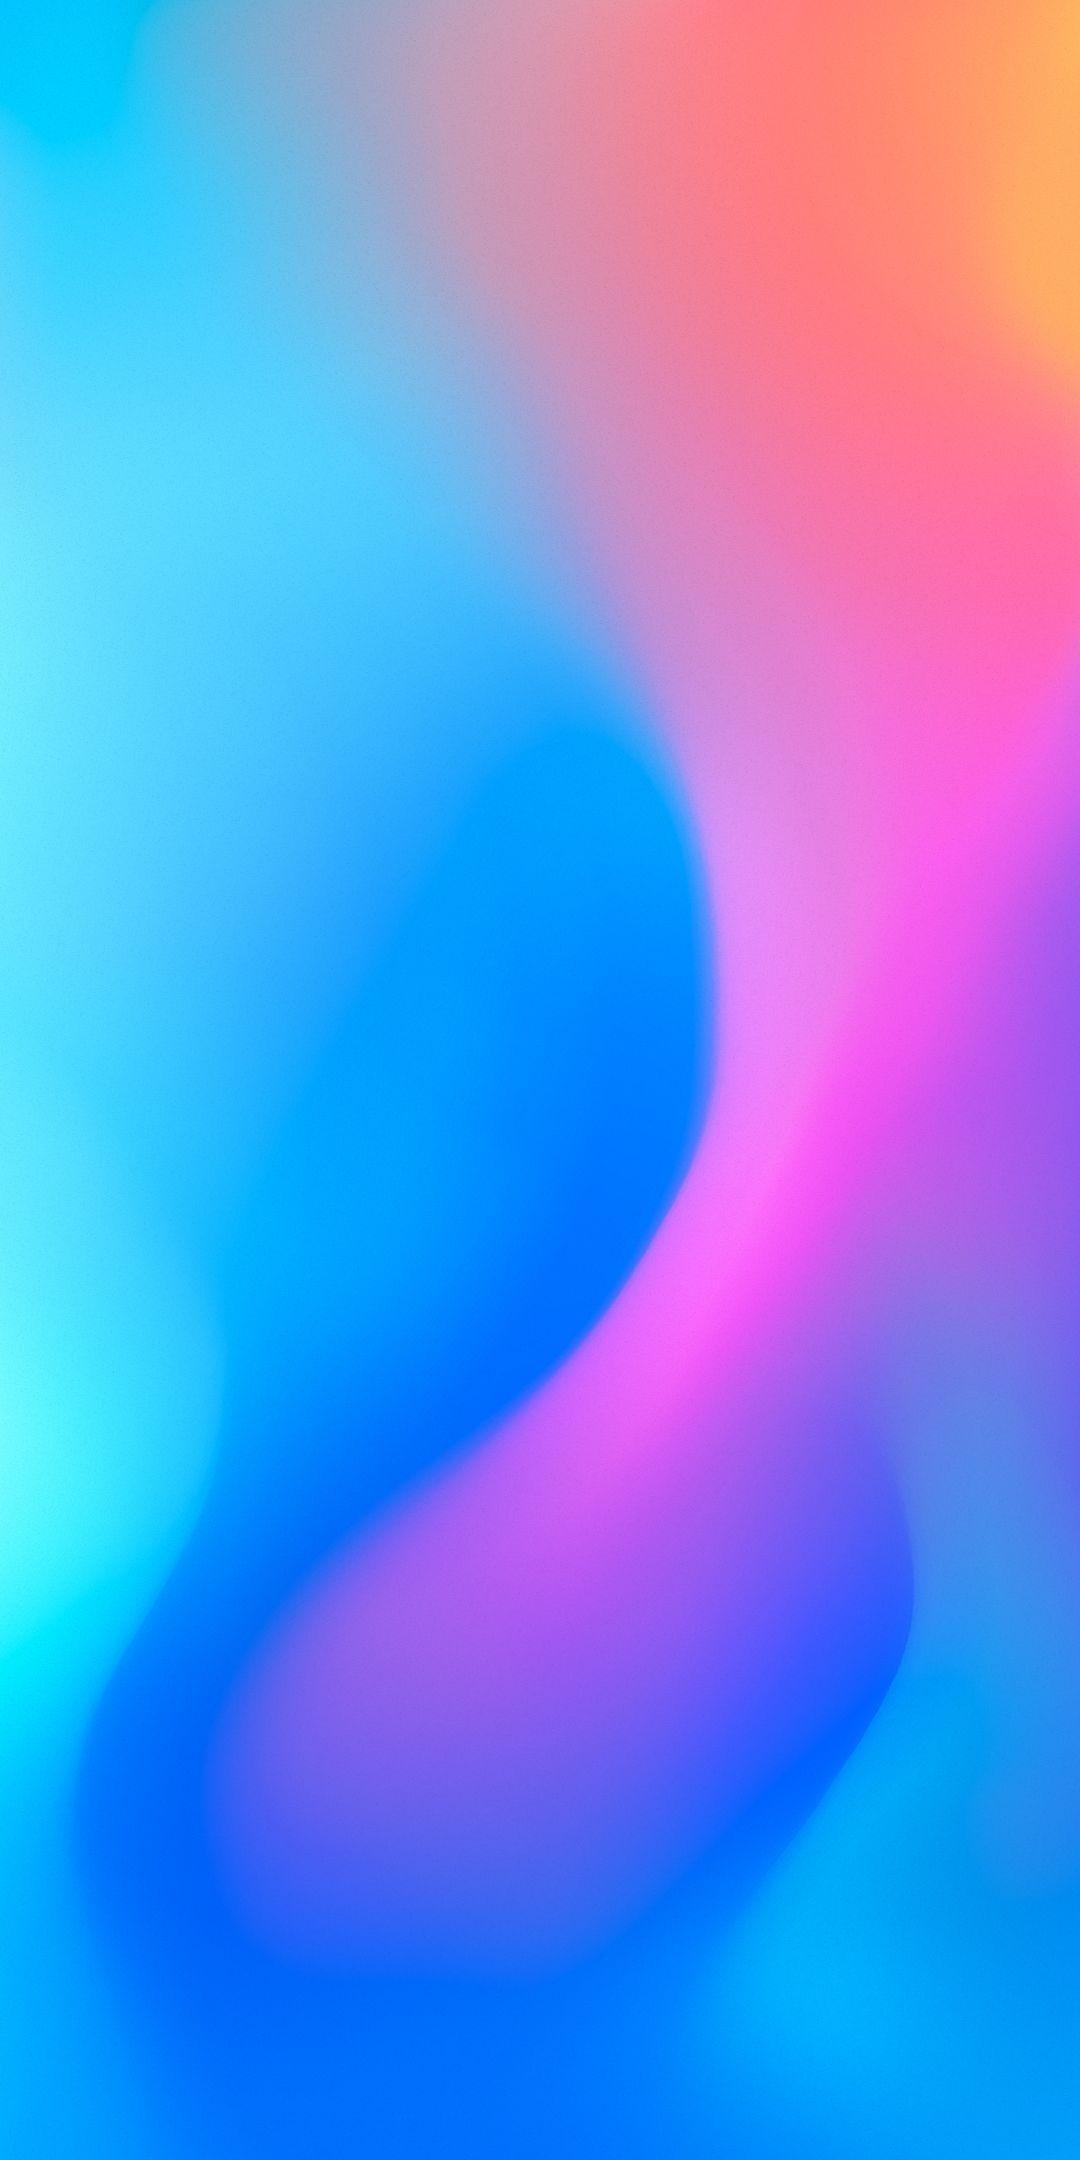 Download MIUI 10 Stock Wallpaper [Complete Collection]